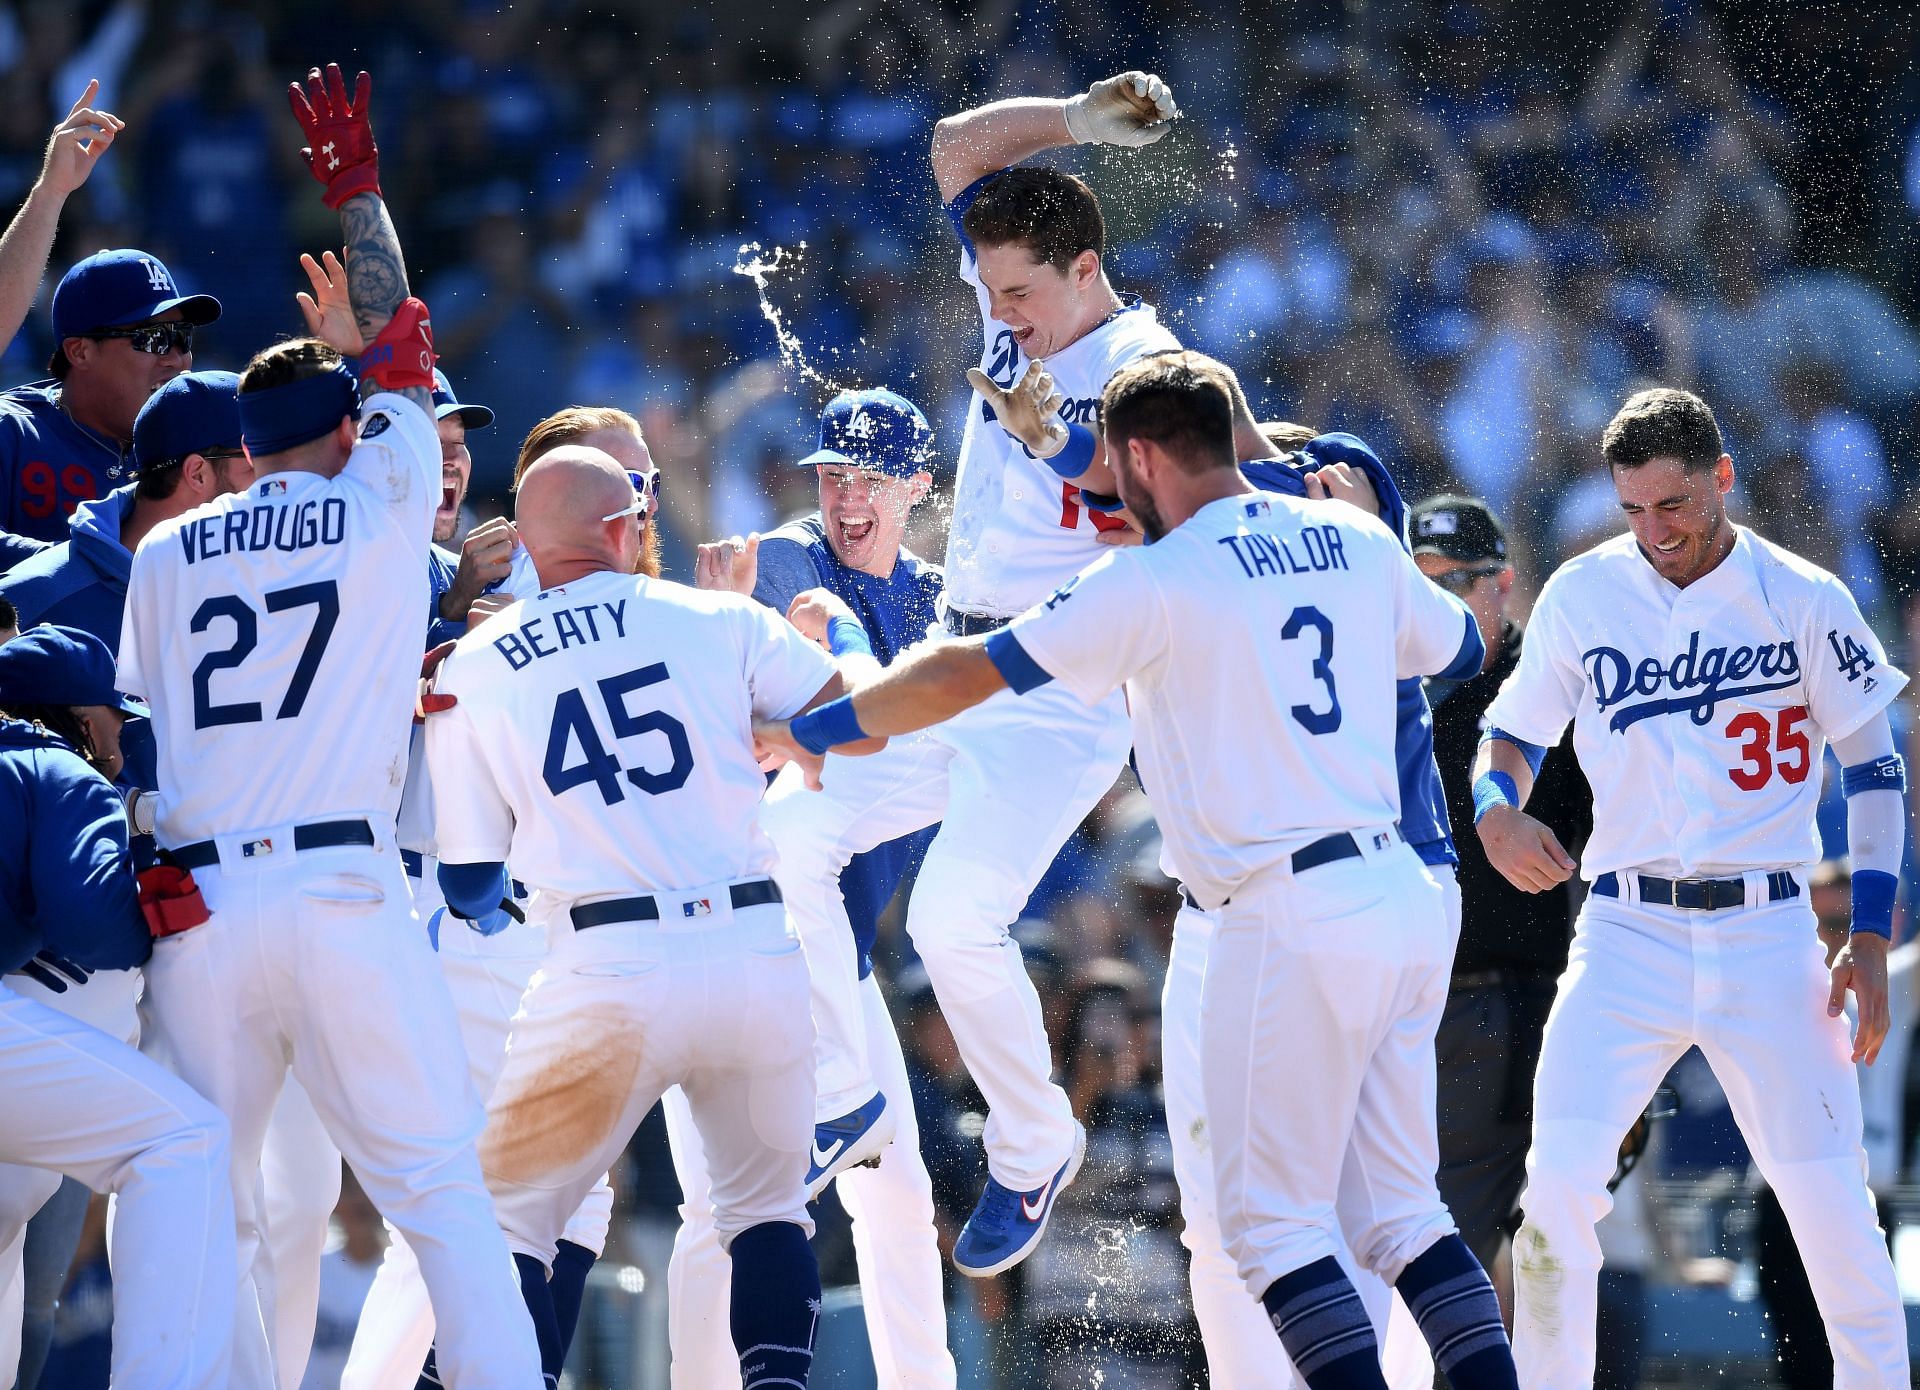 The Dodgers celebrate a victory.